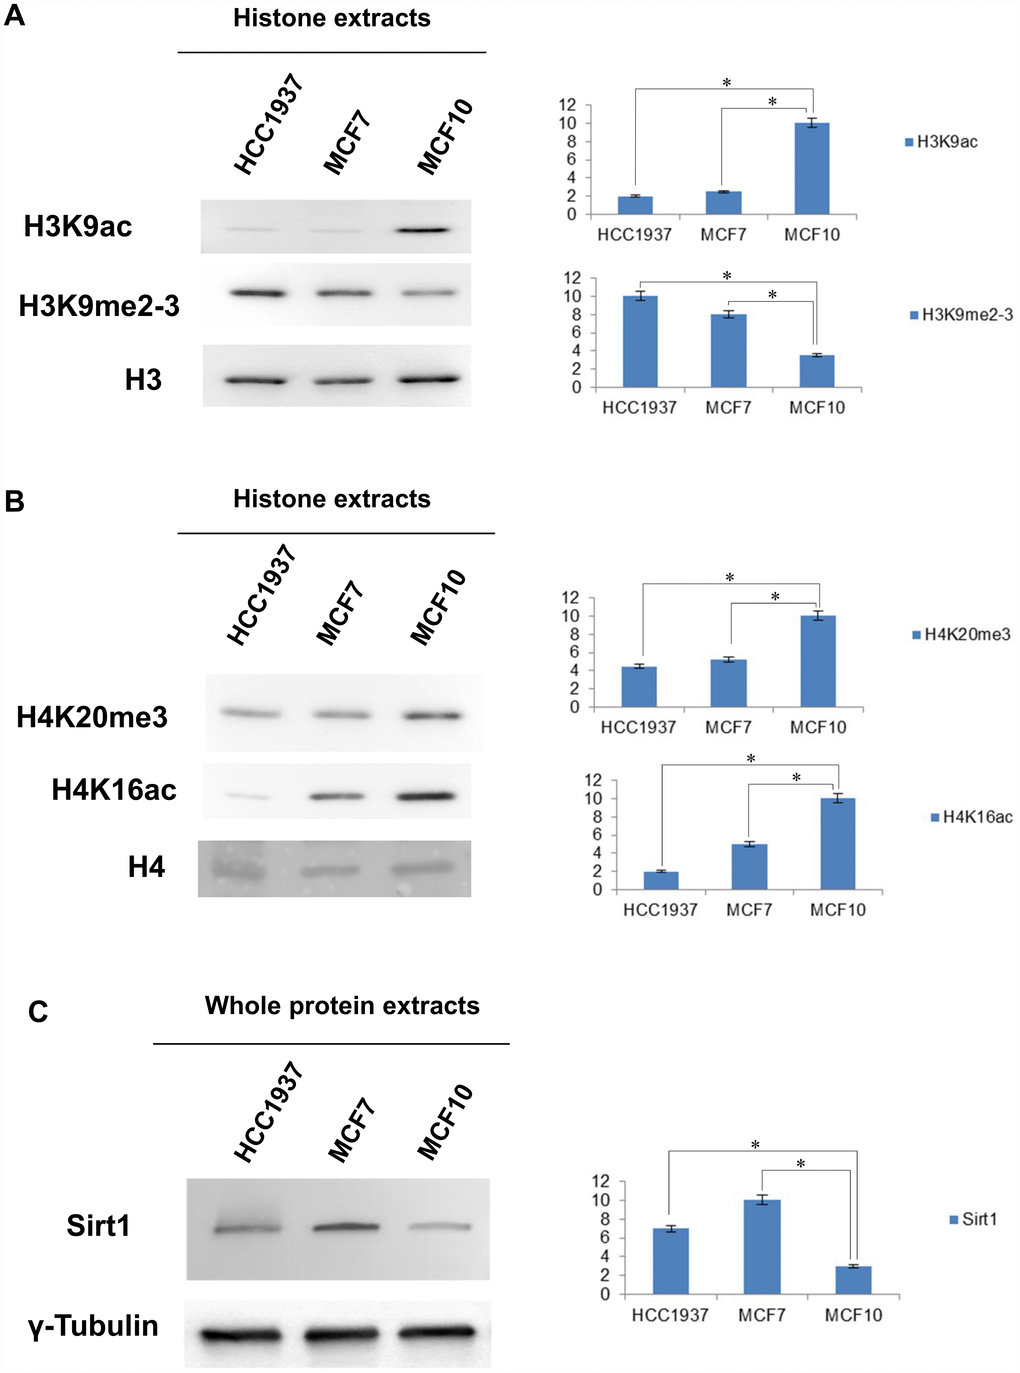 Western blot and densitometry analysis relative to the expression of histone marks and SIRT1 in MCF10, MCF7 and HCC1937 cells. (A) Western blot and densitometry analysis relative to the expression of histone marks in MCF10, MCF7 and HCC1937 cells. (A) H3K9ac, H3K9me2-3, PMTs signal were normalized against the total level of histone H3. (B) H4K20me3, H4K16Ac, PMTs signal were normalized against the total level histone H4. (C) Western blot and densitometry analysis of the expression levels of SIRT1 in whole protein extracts from MCF10, MCF7 and HCC1937 cells. A goat polyclonal anti-γ-Tubulin antibody was used (C-20) to confirm an equal loading of proteins. The assays were repeated in three independent biological replicates and statistically significant differences were determined using one-way ANOVA followed by Dunnett's multiple comparisons test. Data are expressed as mean ± SEM (N =3), p-value 